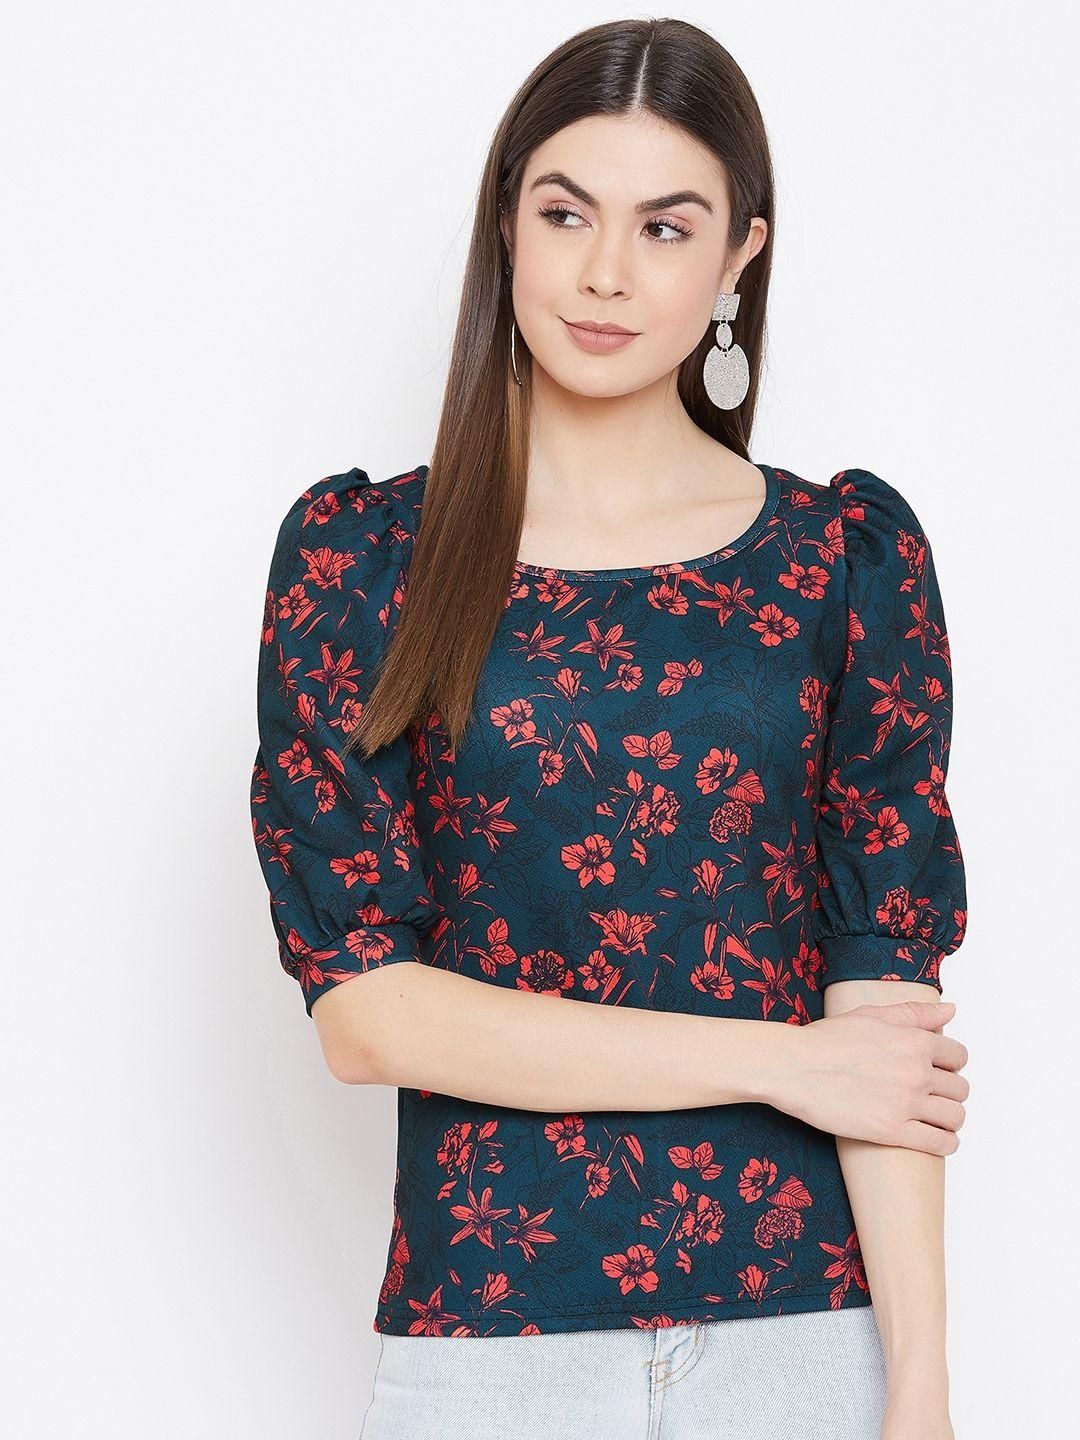 UPTOWNIE Women's Polyester Floral Stretchable Round Neck Top